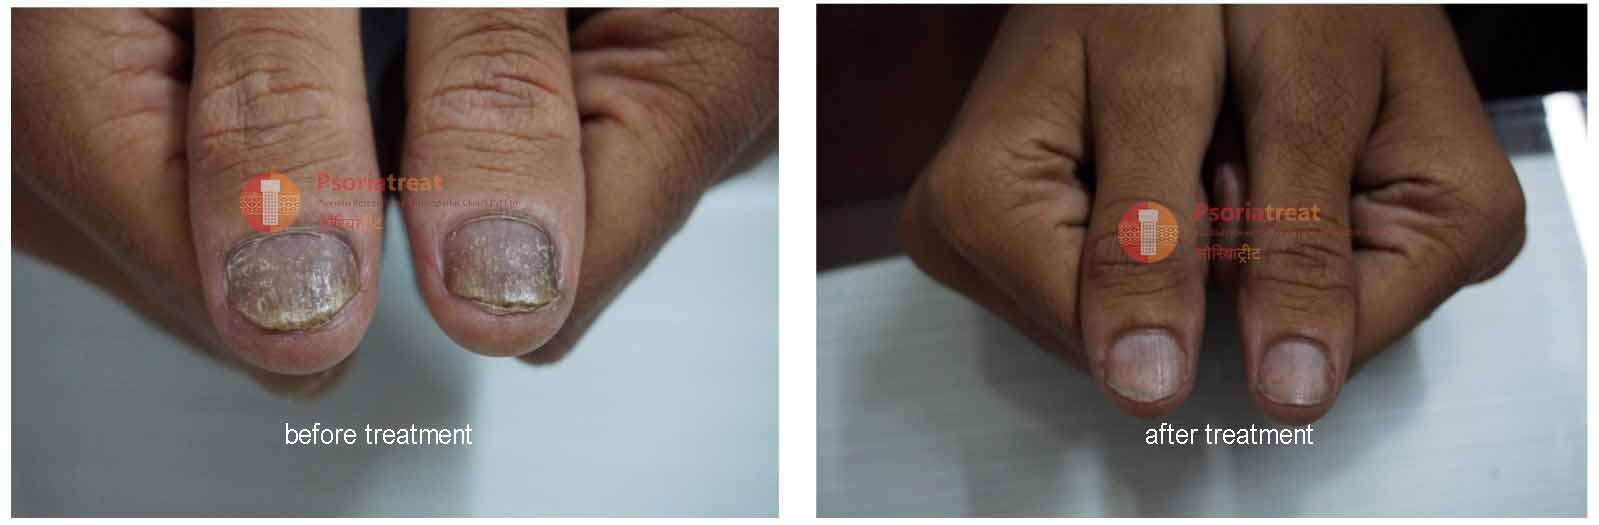 Improve Nail Psoriasis at Home with These Tips - Plastic Surgery Practice